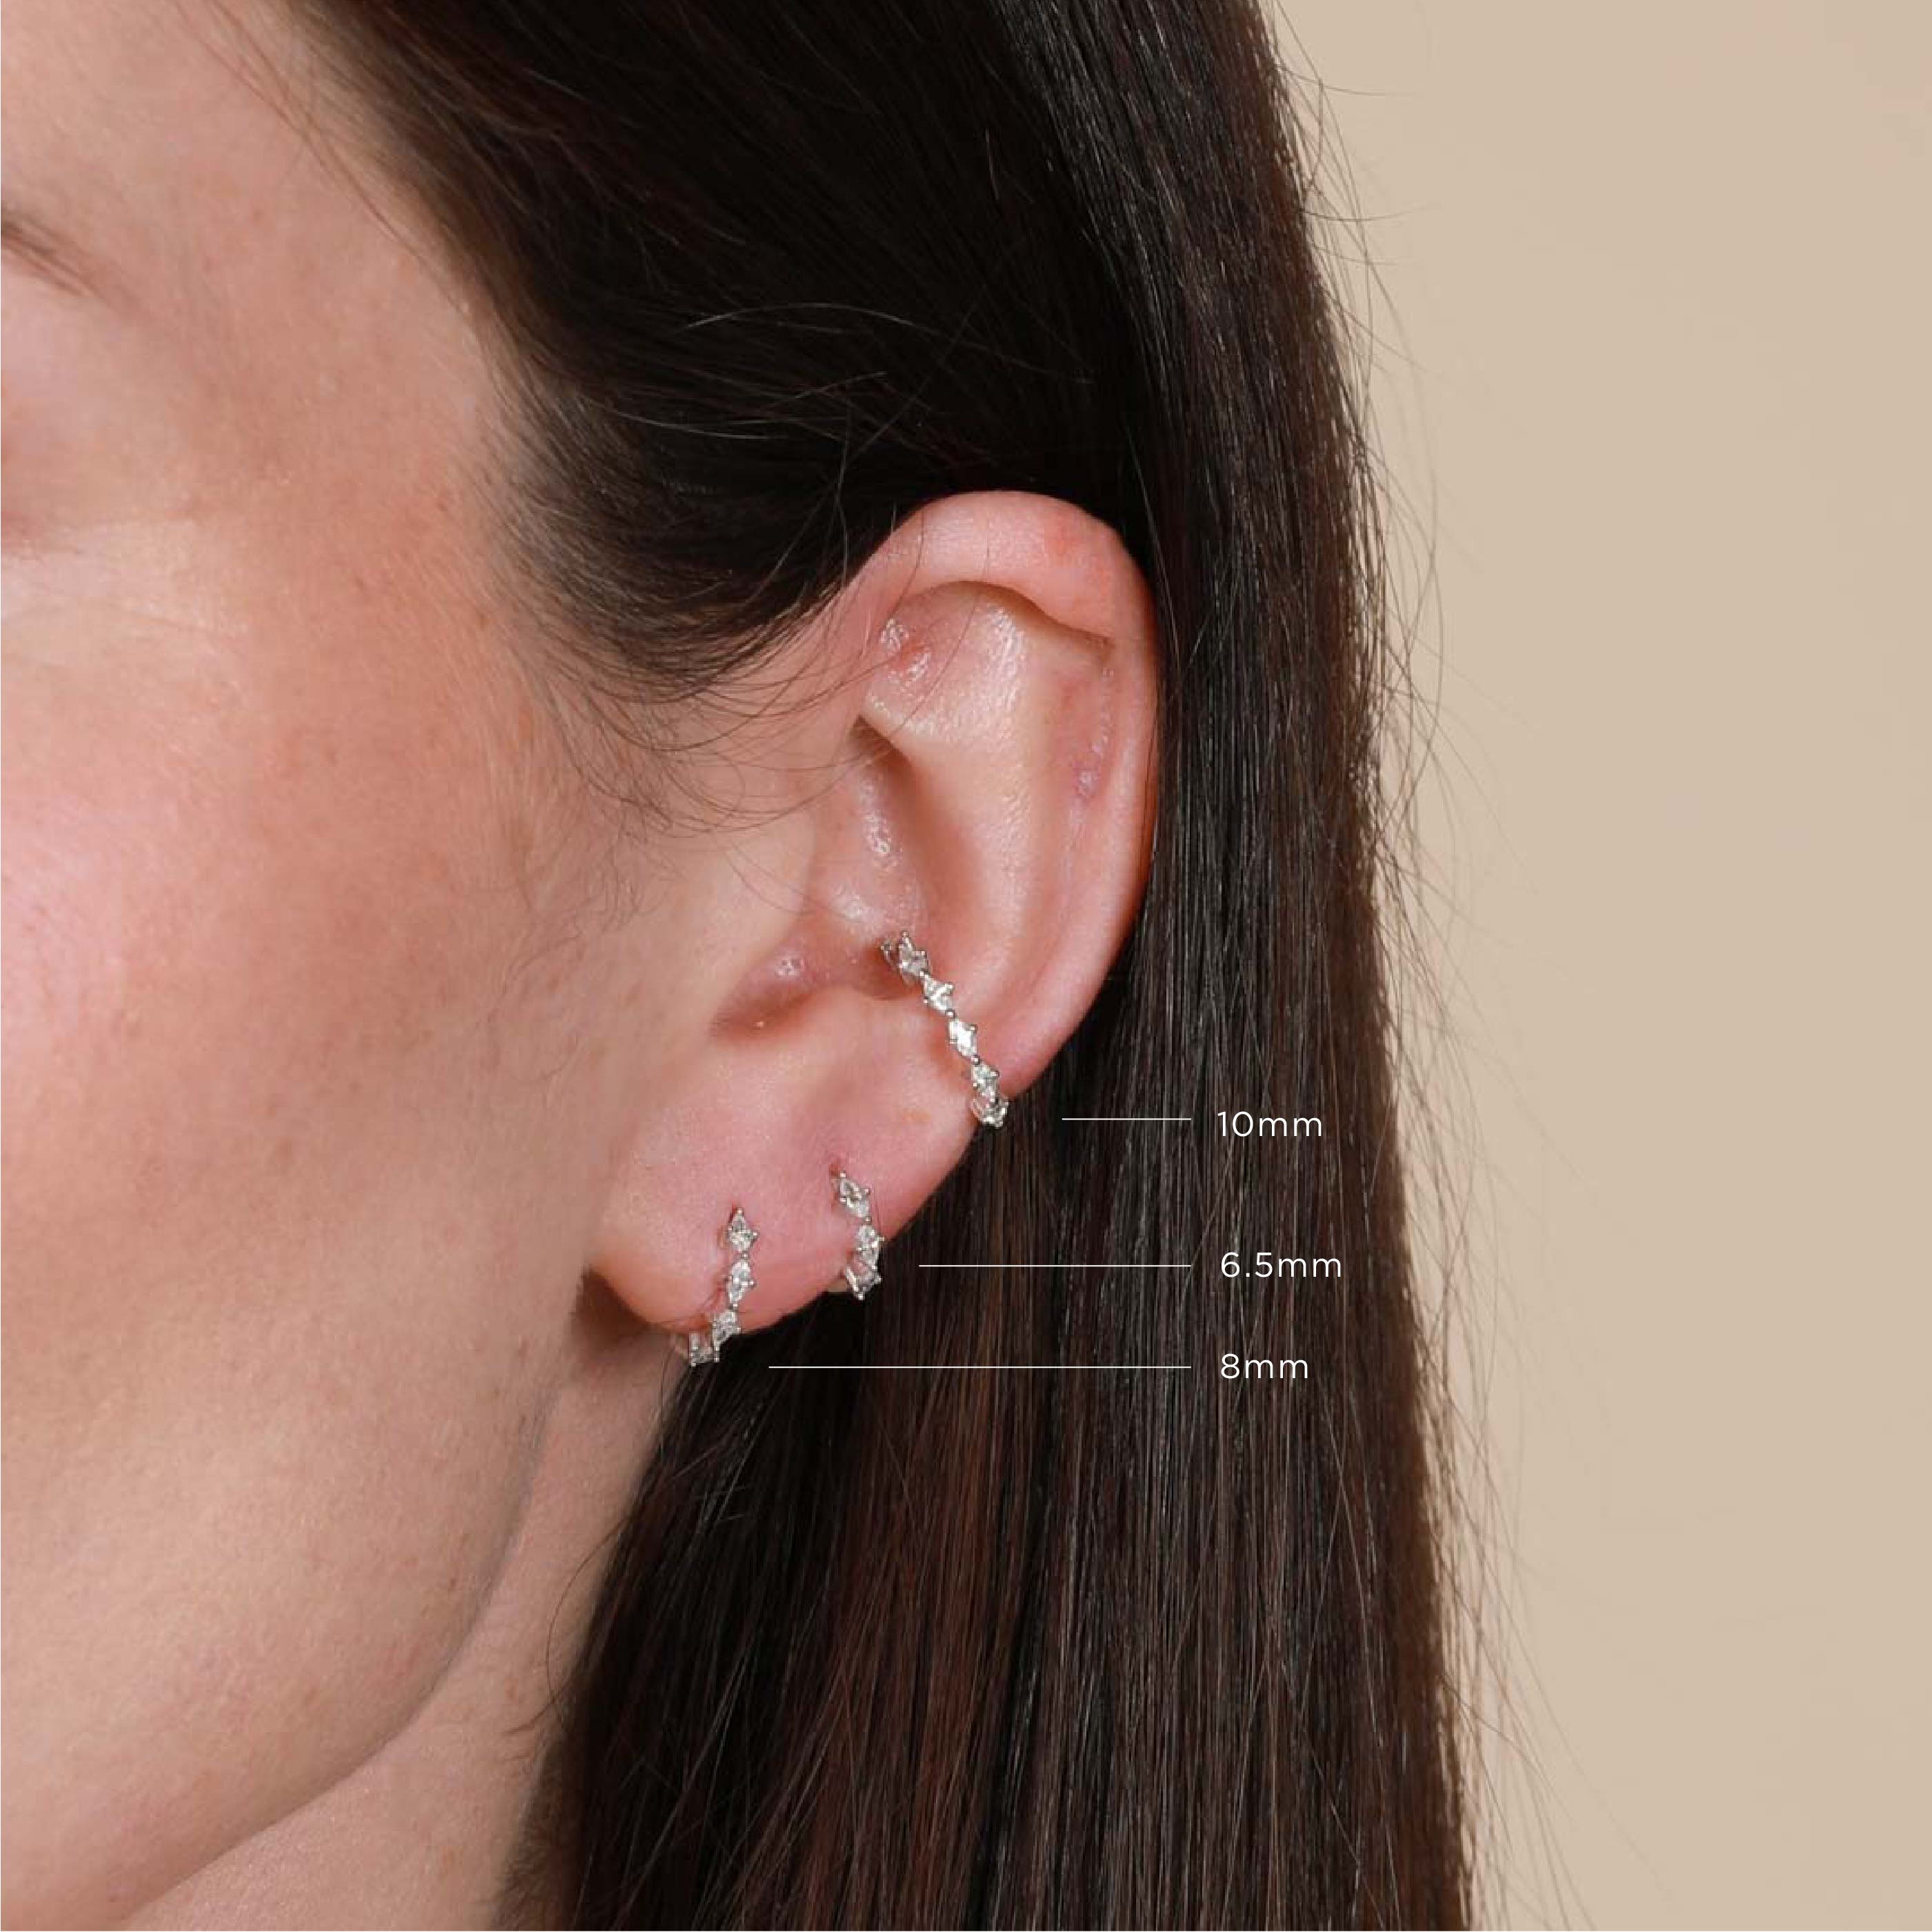 Worn shot of Navette Hoop 6.5mm in Silver in upper lobe piercing location with sizes labelled